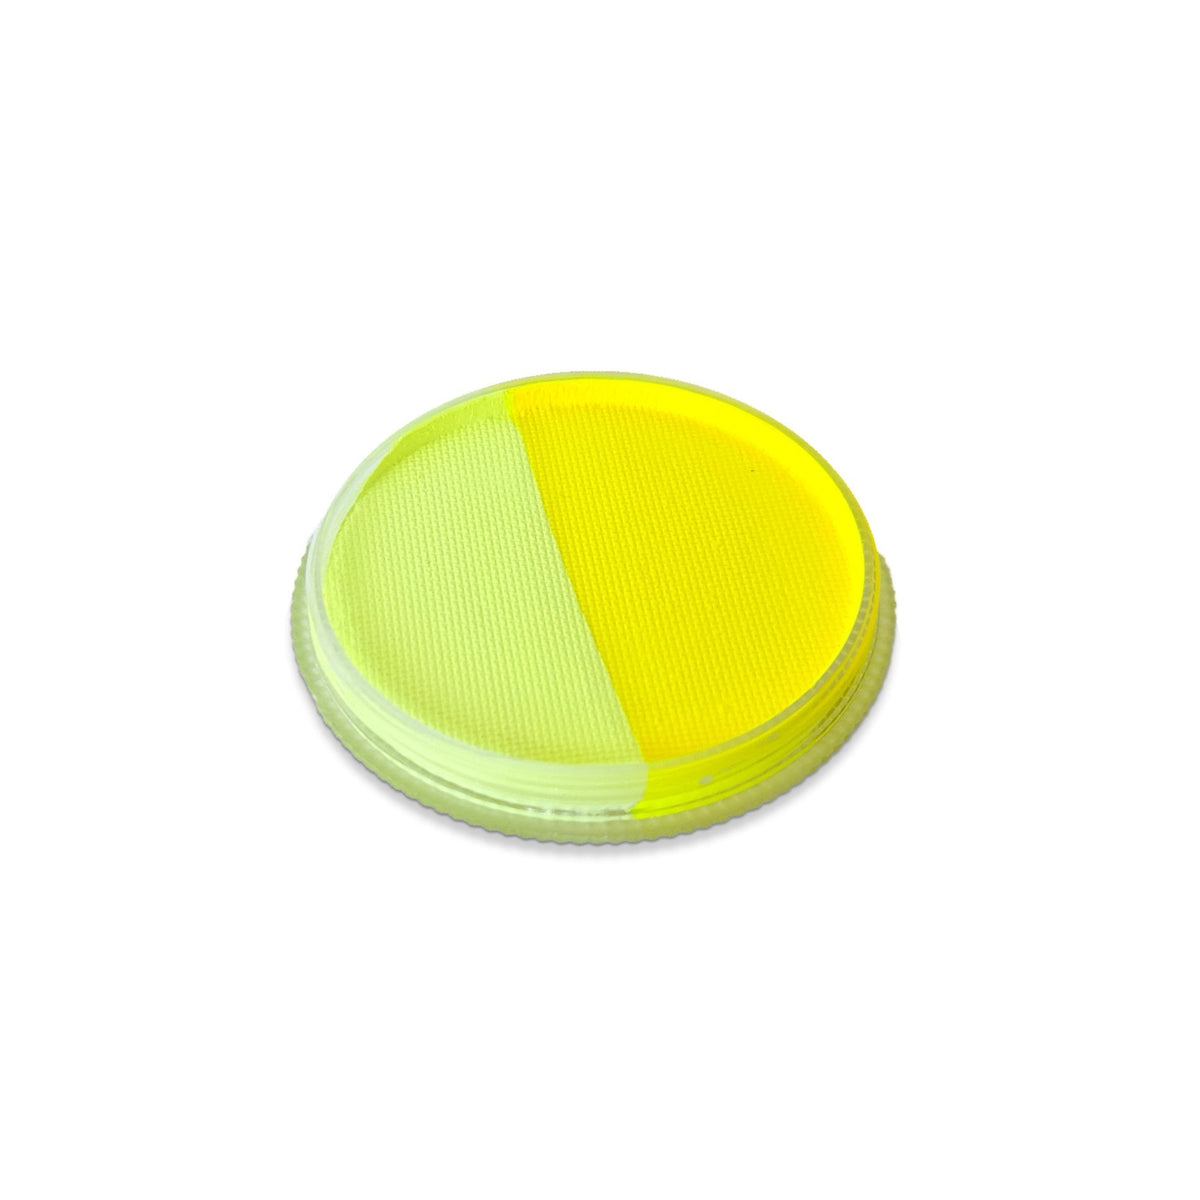 DUO FACE PAINT - NEON YELLOW / PASTEL YELLOW